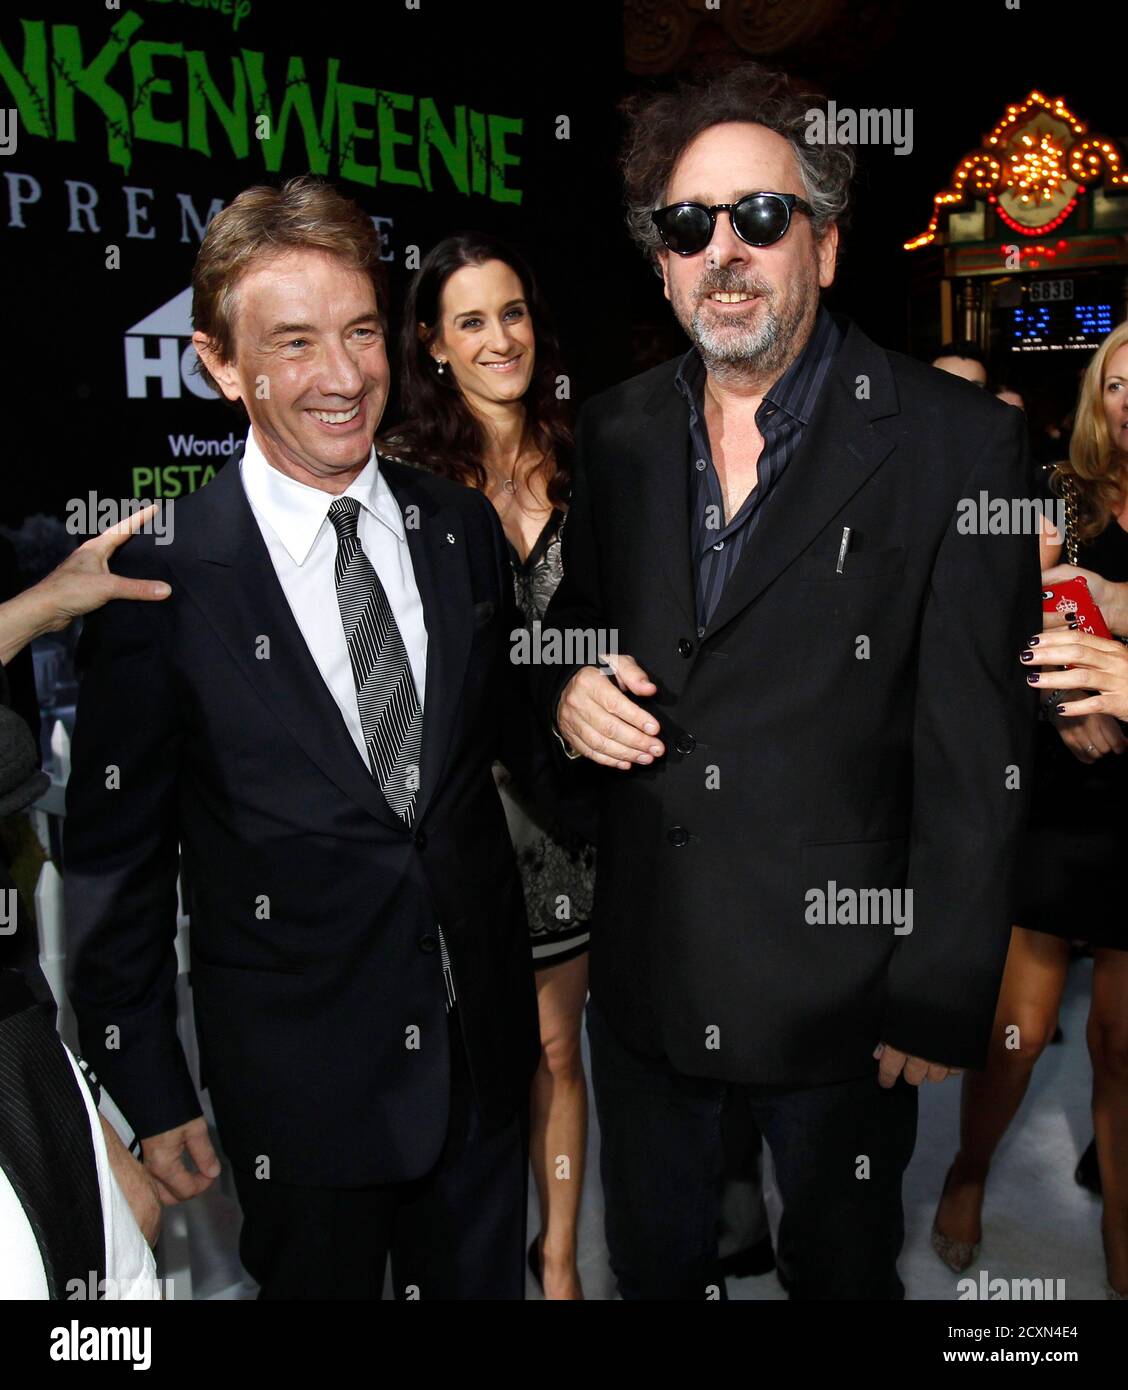 Director and producer Tim Burton (R) poses with cast member Martin Short at  the premiere of "Frankenweenie" at El Capitan theatre in Hollywood,  California September 24, 2012. The movie opens in the